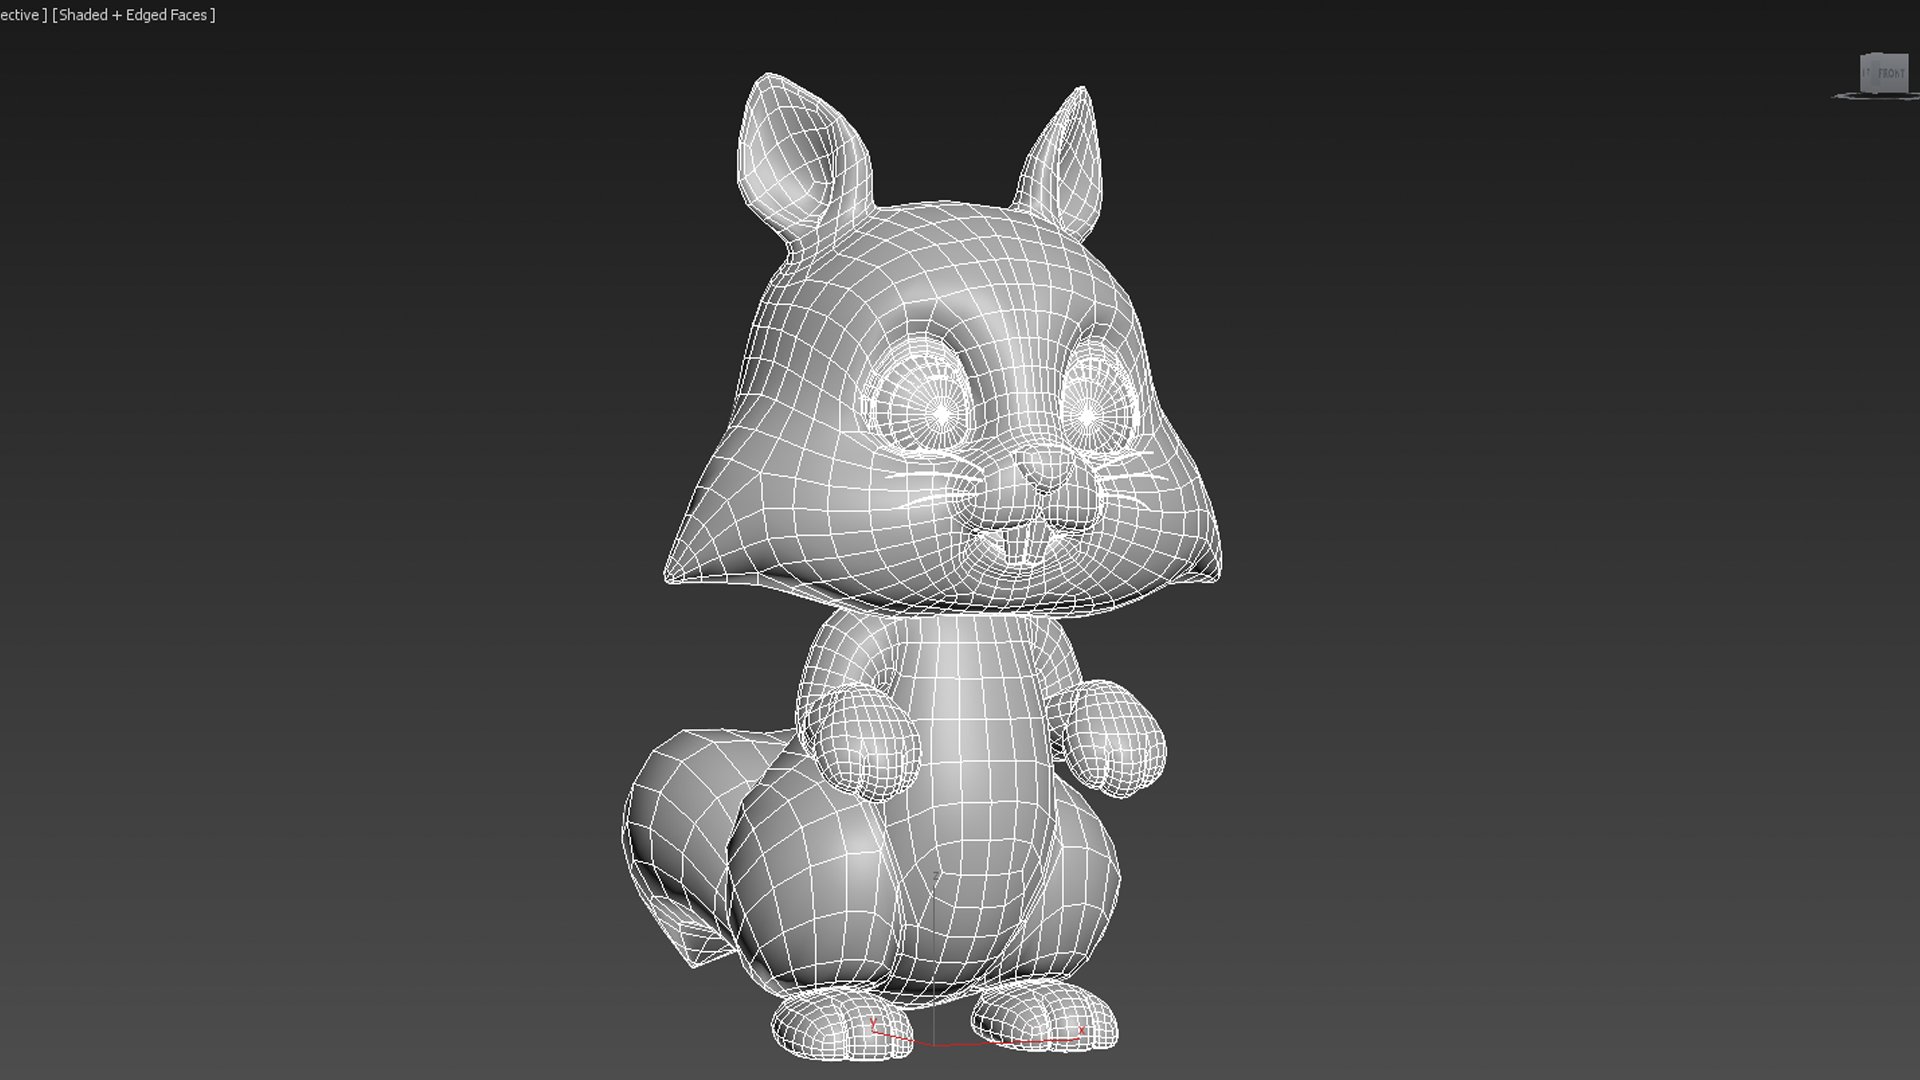 This is an animatable stylized Squirrel.